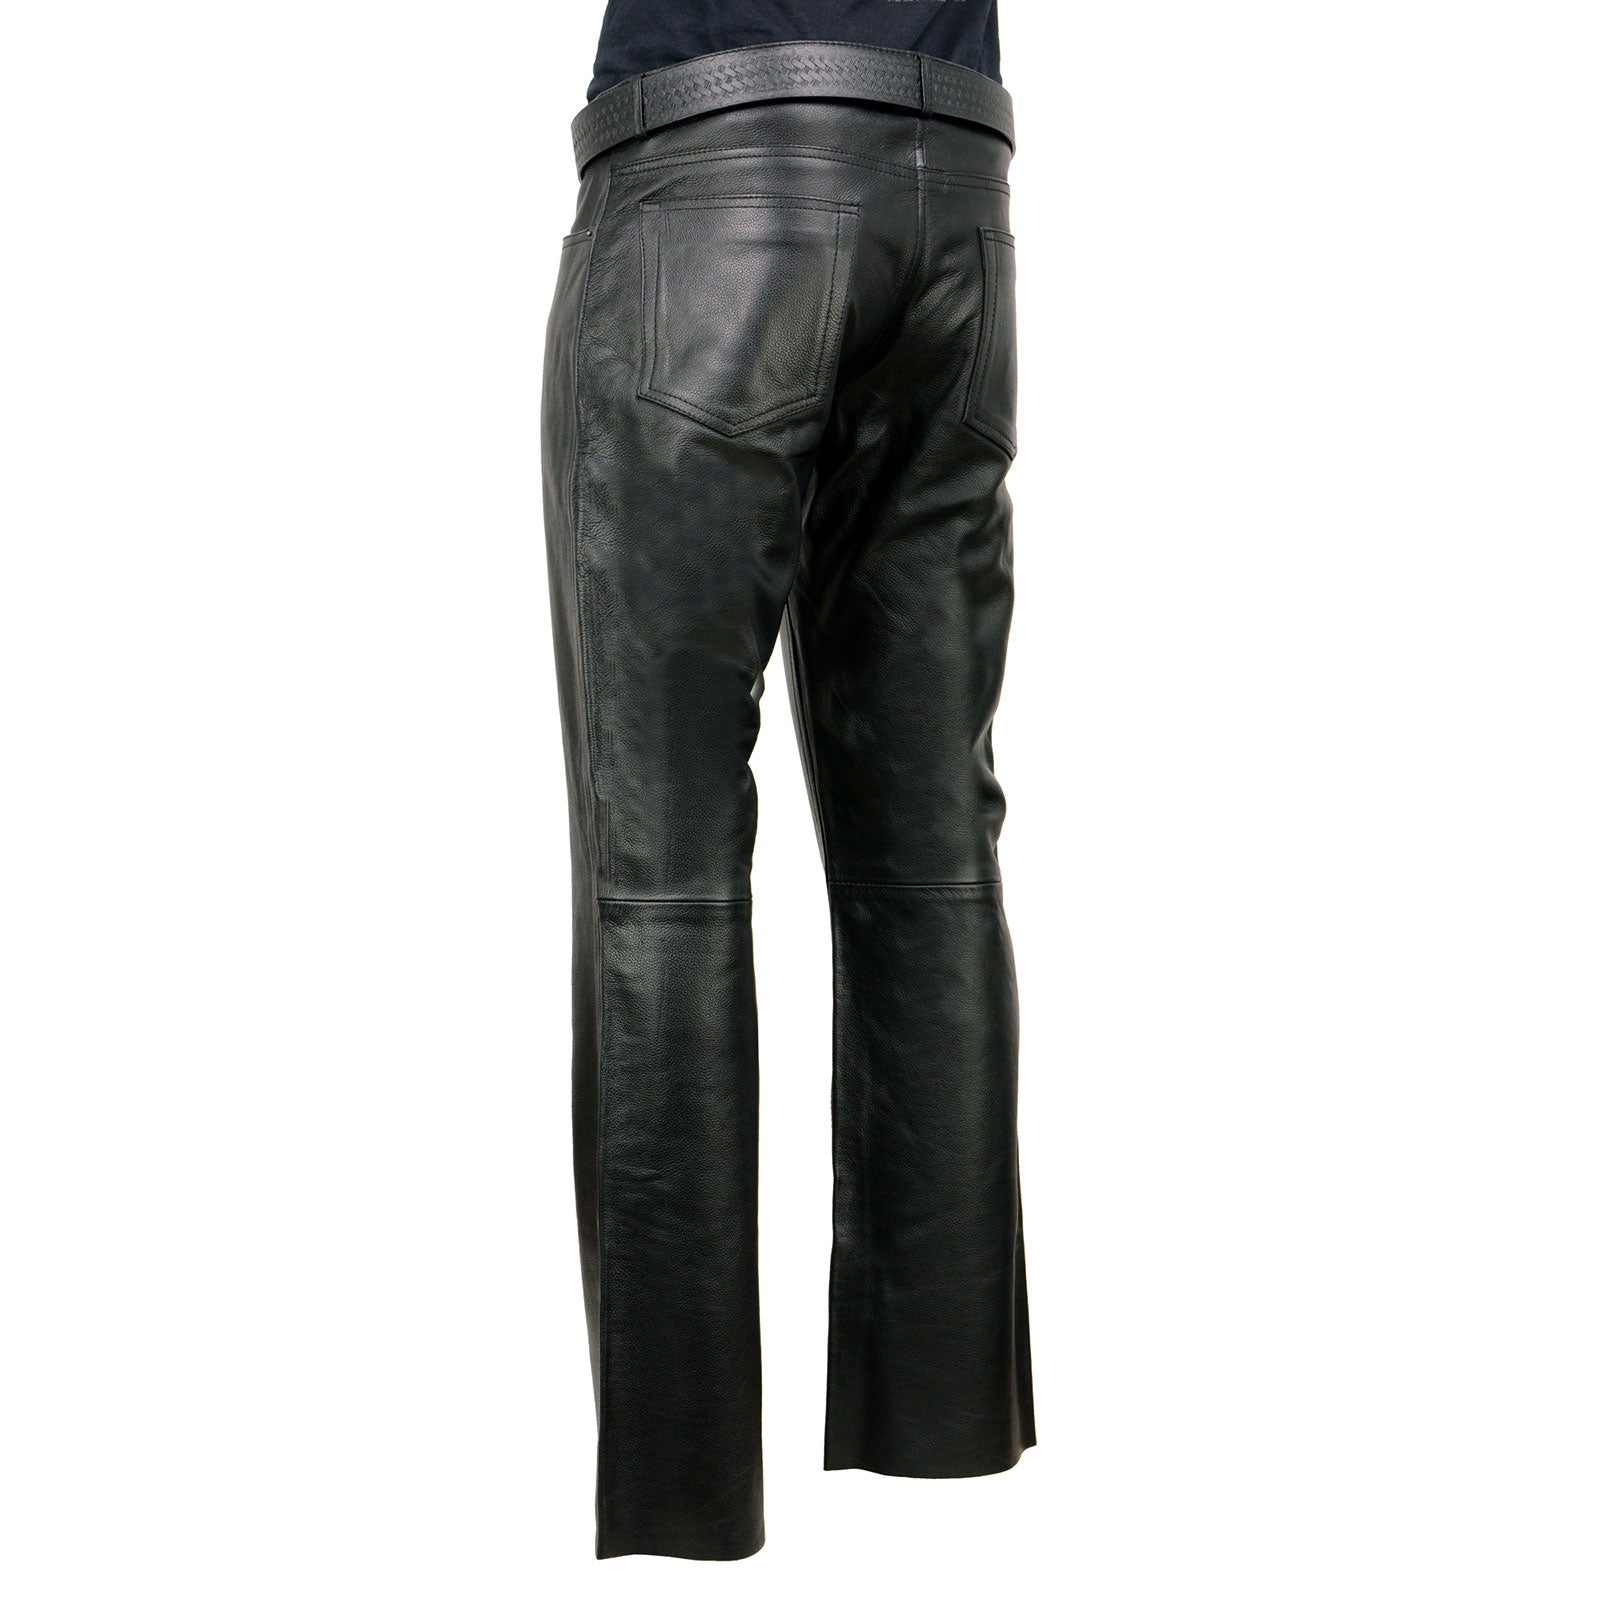 Milwaukee Leather | Classic Fit 5 Pocket Leather Pants for Men - Premium Leather Motorcycle Riding Pants - LKM5790